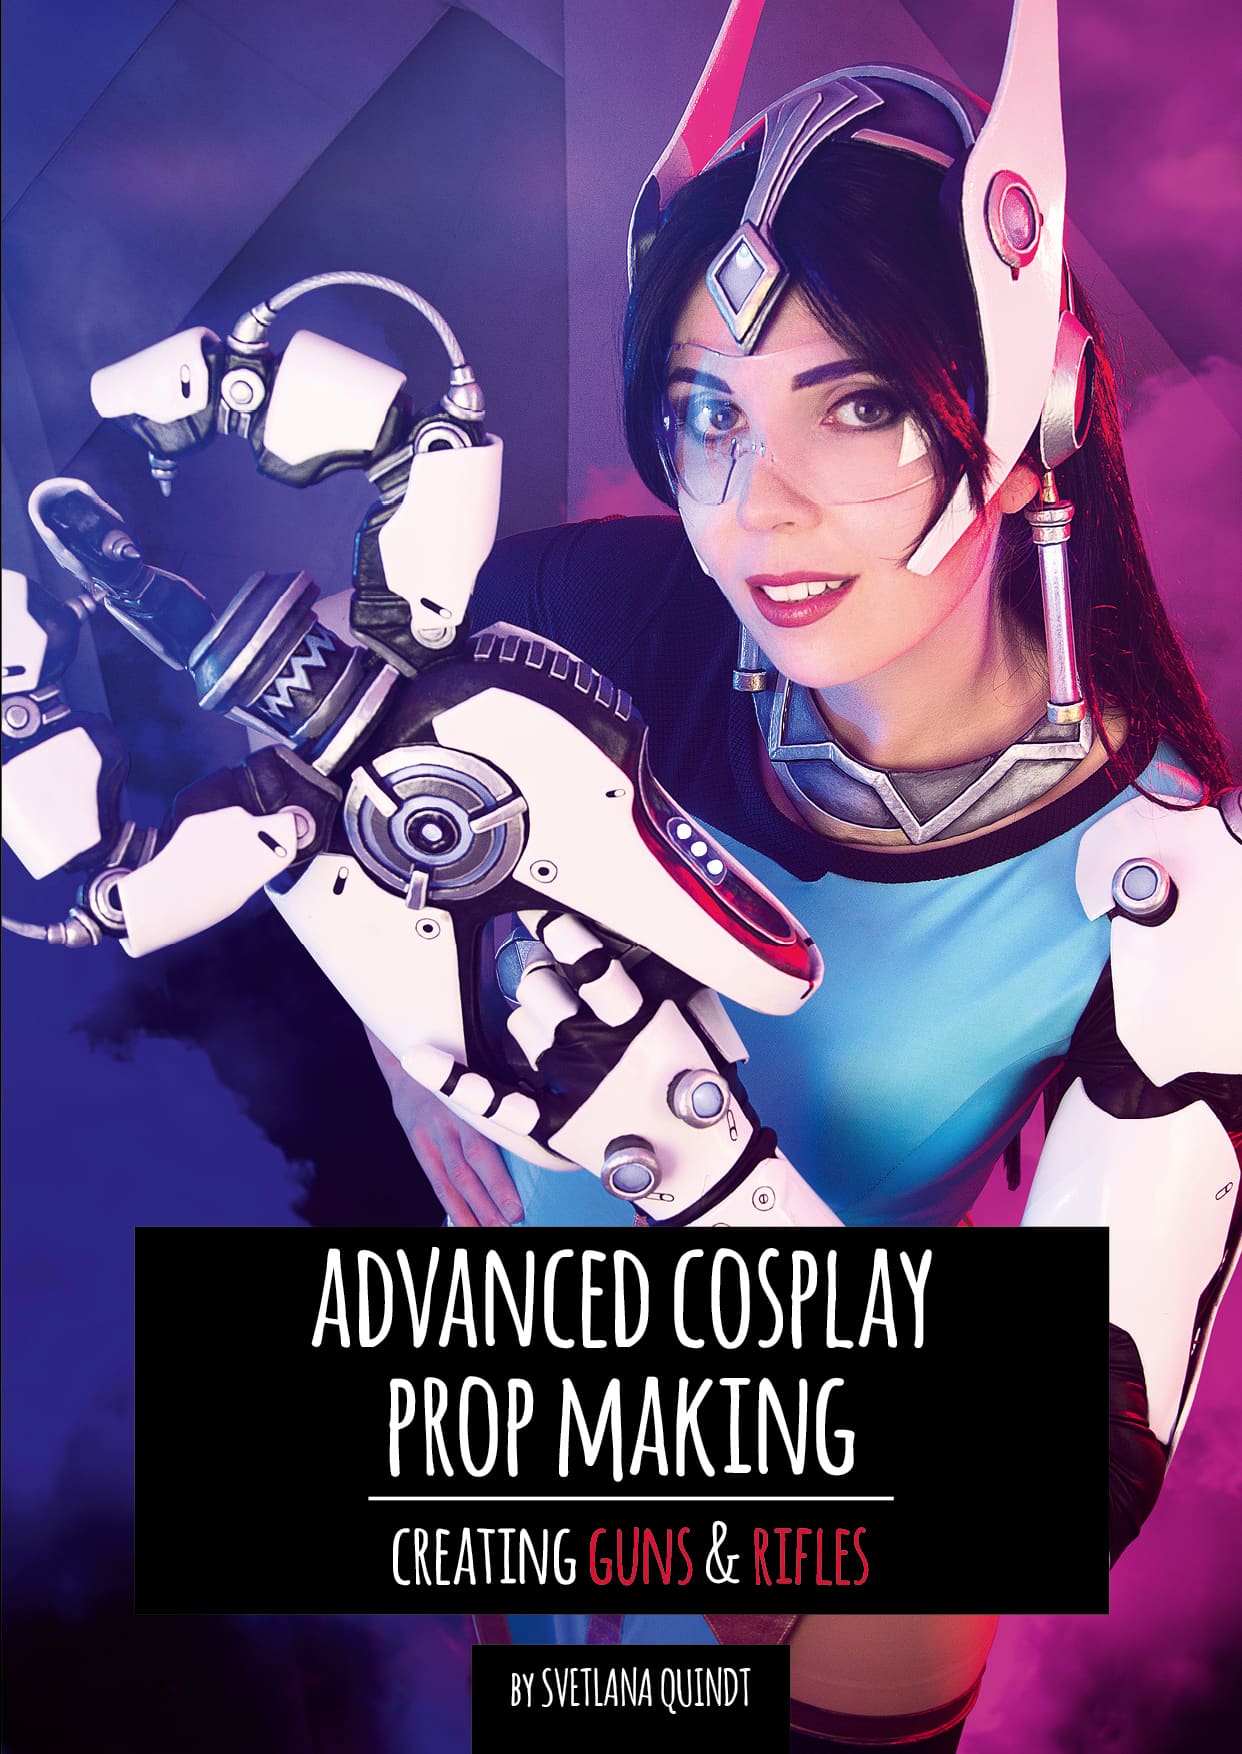 Advanced Cosplay Prop Making by Kamui Cosplay